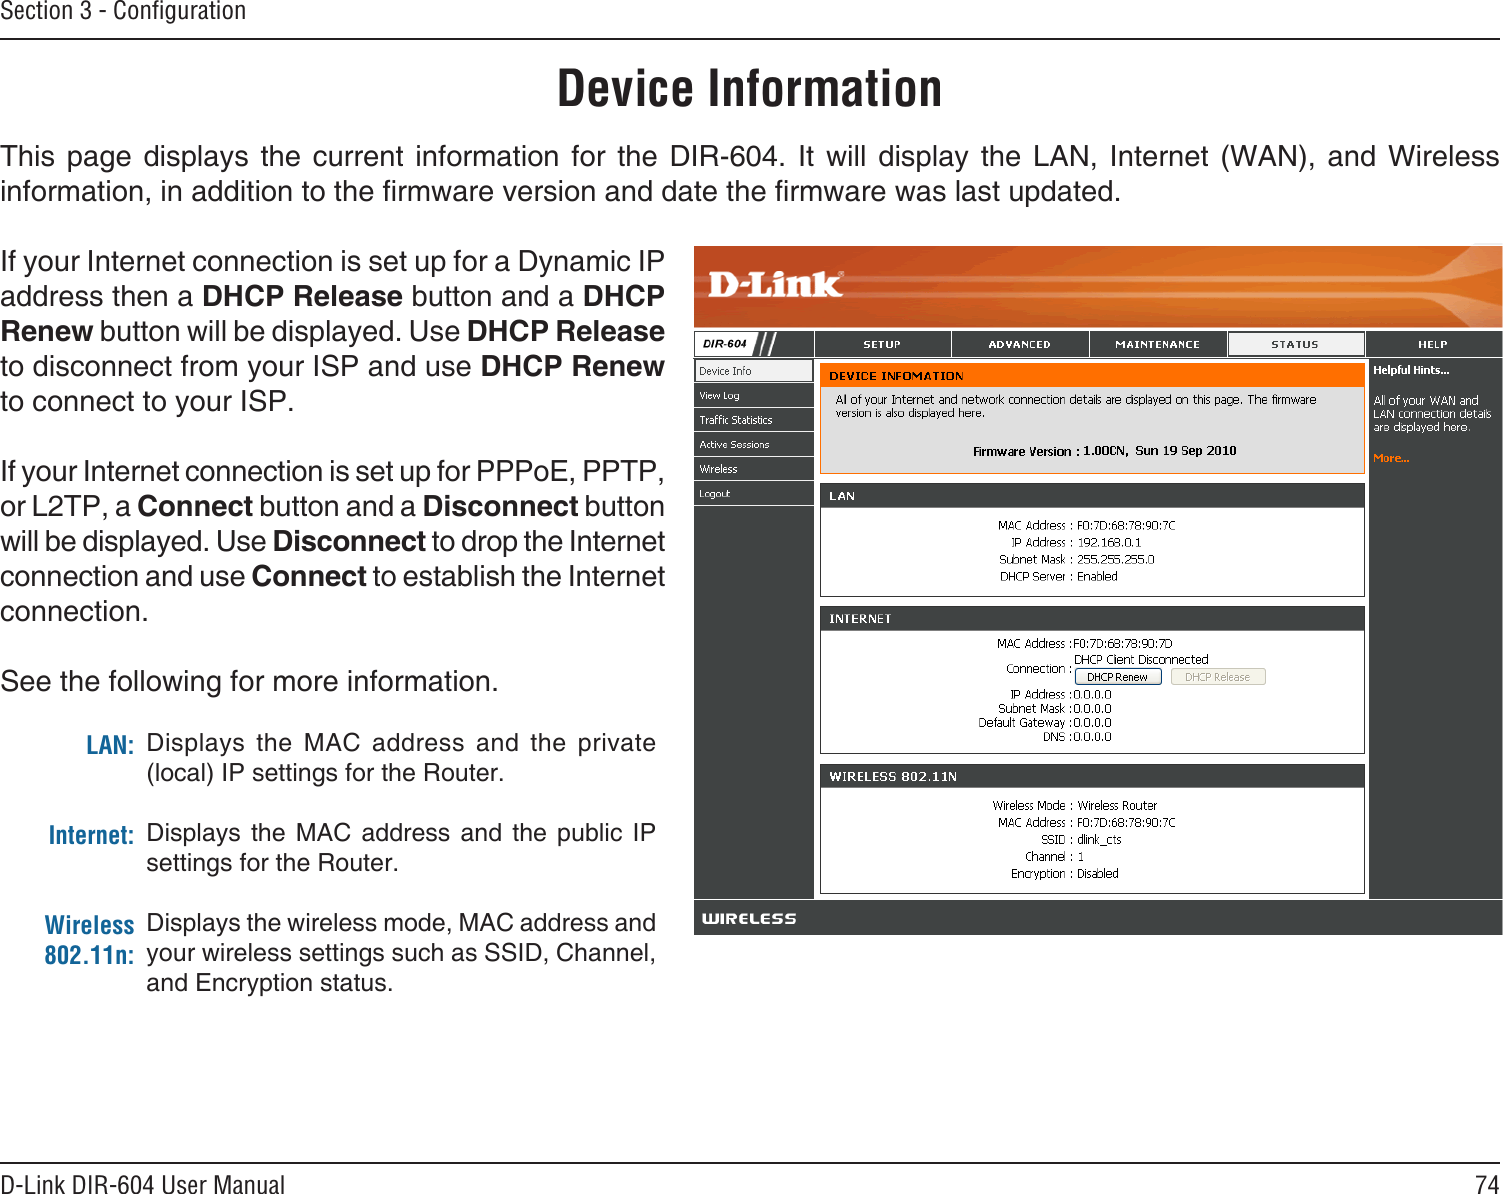 74D-Link DIR-604 User ManualSection 3 - ConﬁgurationThis  page  displays  the  current  information  for  the  DIR-604.  It  will  display  the  LAN,  Internet  (WAN),  and  Wireless information, in addition to the rmware version and date the rmware was last updated.If your Internet connection is set up for a Dynamic IP address then a DHCP Release button and a DHCP Renew button will be displayed. Use DHCP Release to disconnect from your ISP and use DHCP Renew to connect to your ISP. If your Internet connection is set up for PPPoE, PPTP, or L2TP, a Connect button and a Disconnect button will be displayed. Use Disconnect to drop the Internet connection and use Connect to establish the Internet connection.See the following for more information.Device InformationLAN:Internet:Wireless 802.11n:Displays  the  MAC  address  and  the  private (local) IP settings for the Router.Displays  the  MAC  address  and  the  public  IP settings for the Router.Displays the wireless mode, MAC address and your wireless settings such as SSID, Channel, and Encryption status.